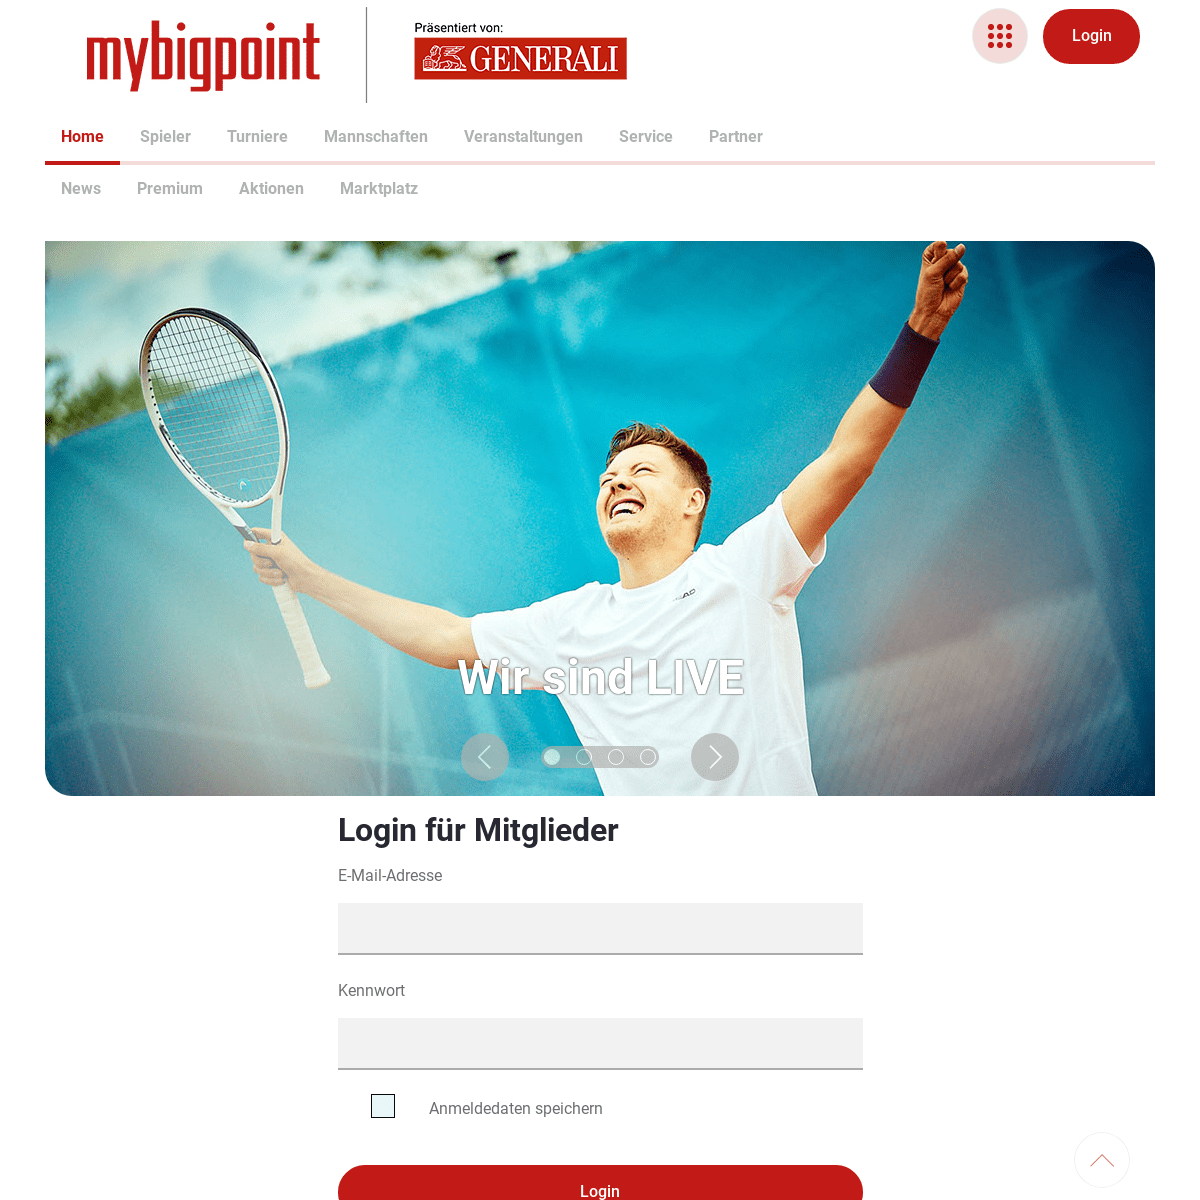 A complete backup of https://mybigpoint.tennis.de